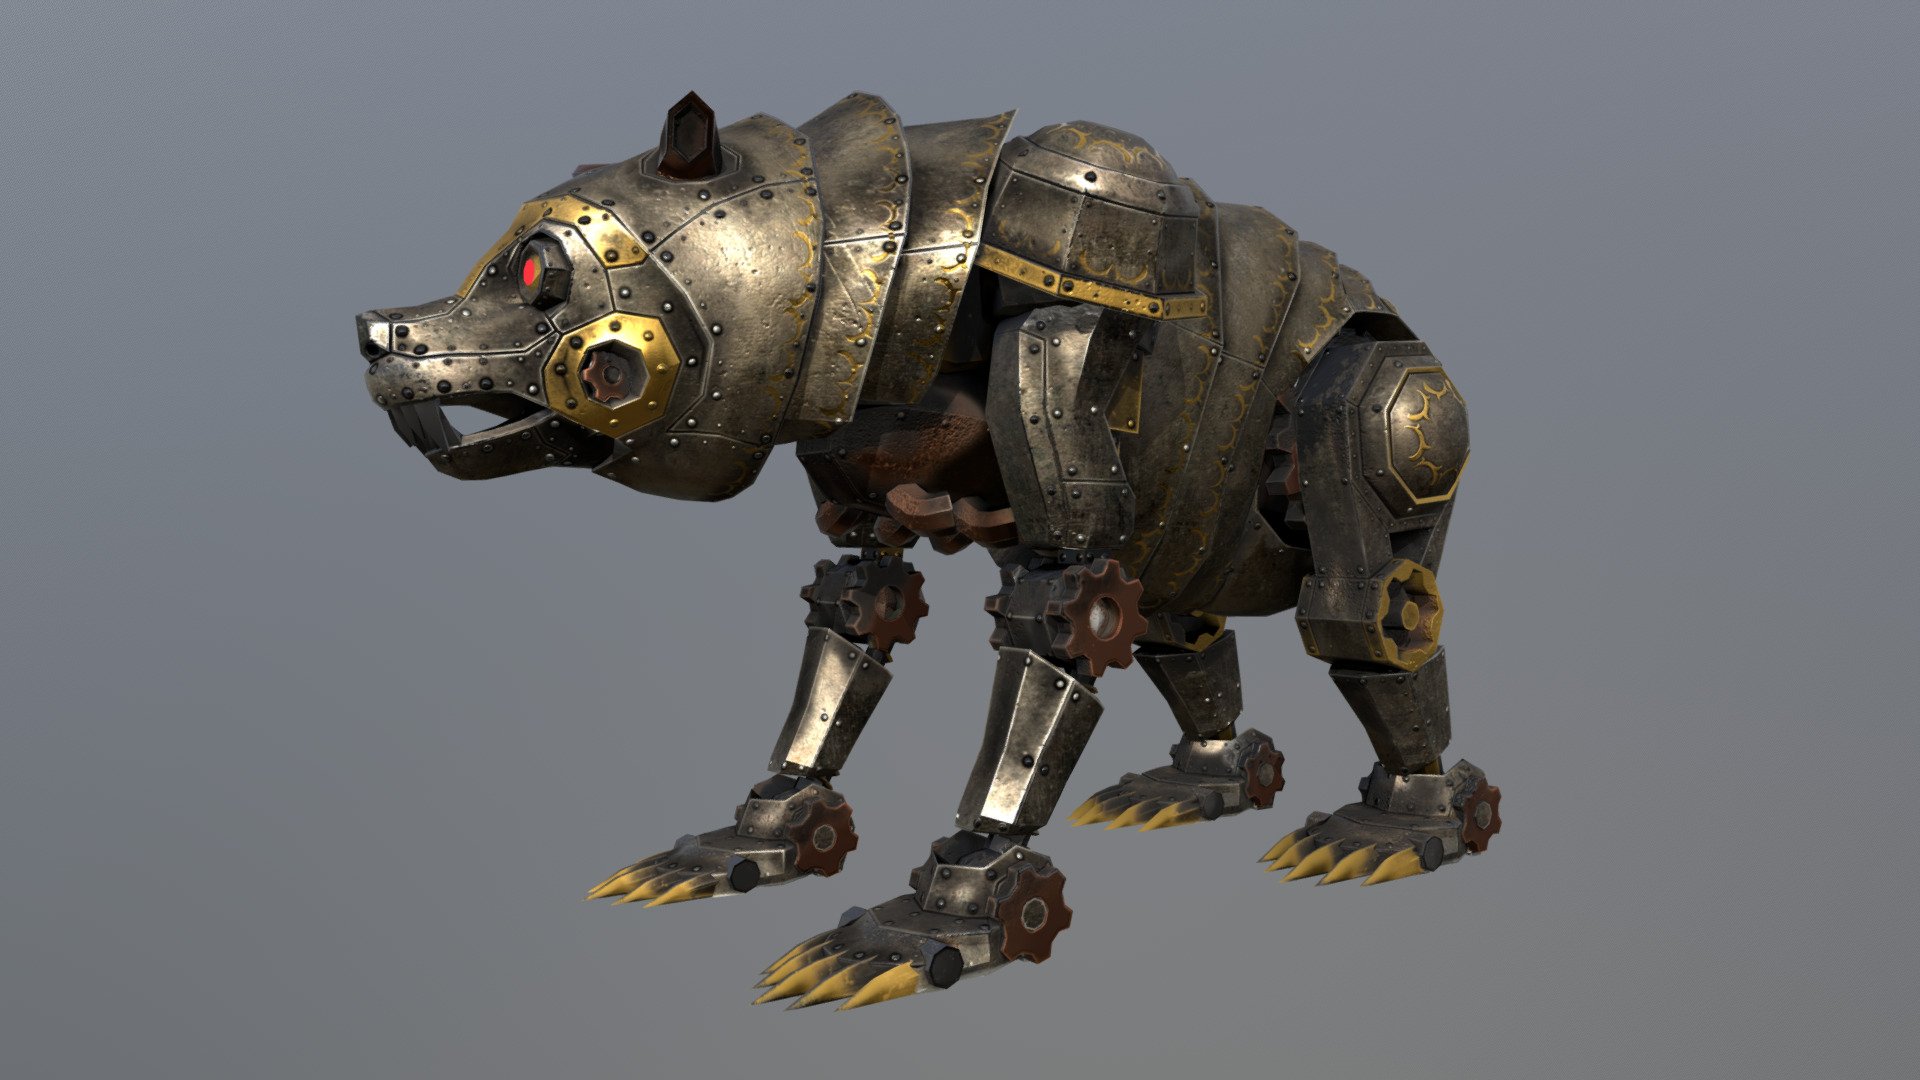 Steampunk Bear for the game “Darco - Reign of Elements”

Now on Steam of
TP Studios

Model &amp; Texture by me - Steampunk Bear Model - 3D model by Anakaii 3d model